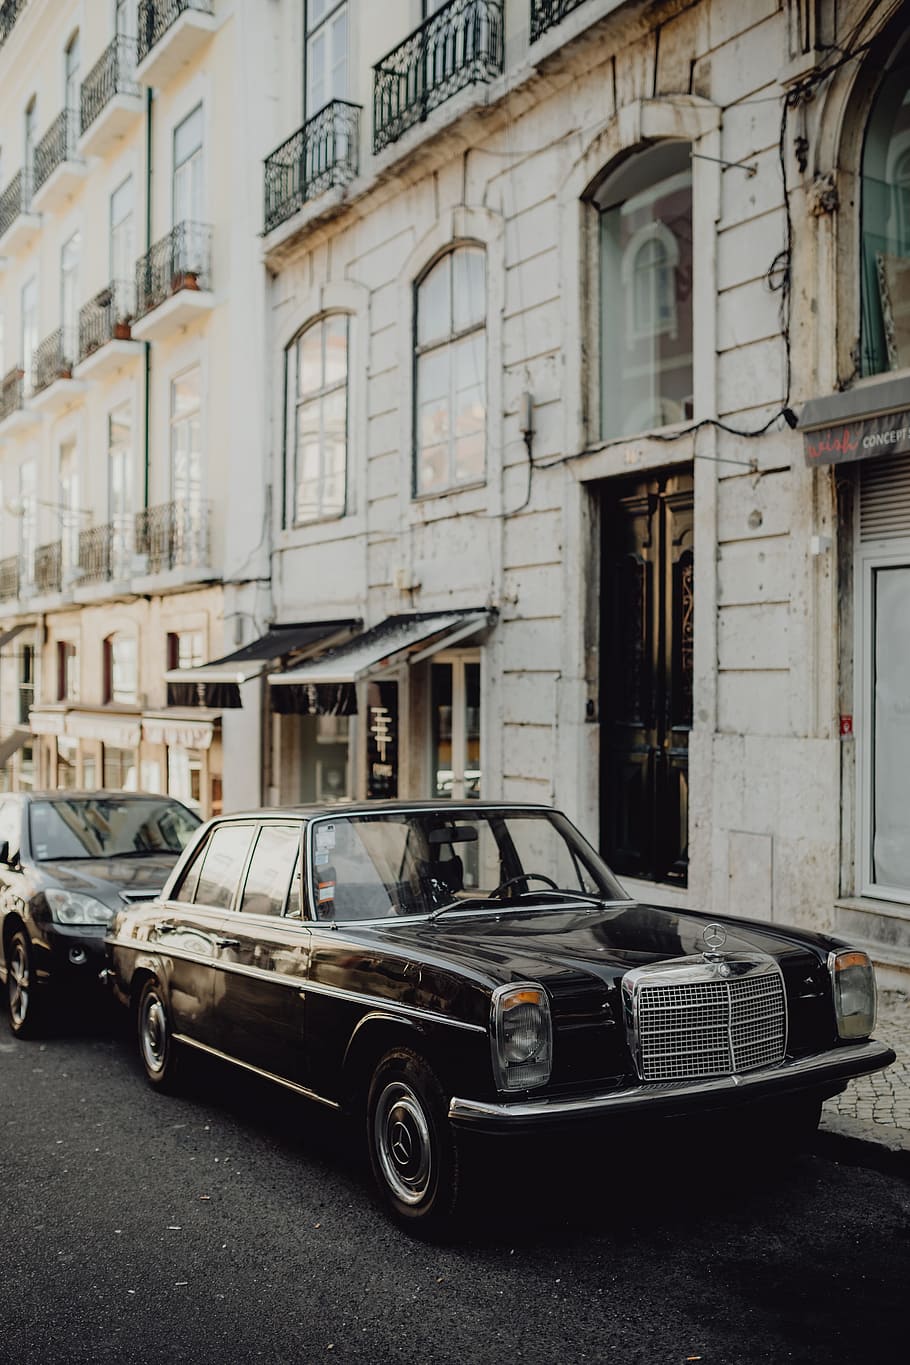 HD wallpaper: An old Mercedes Benz parked in the street